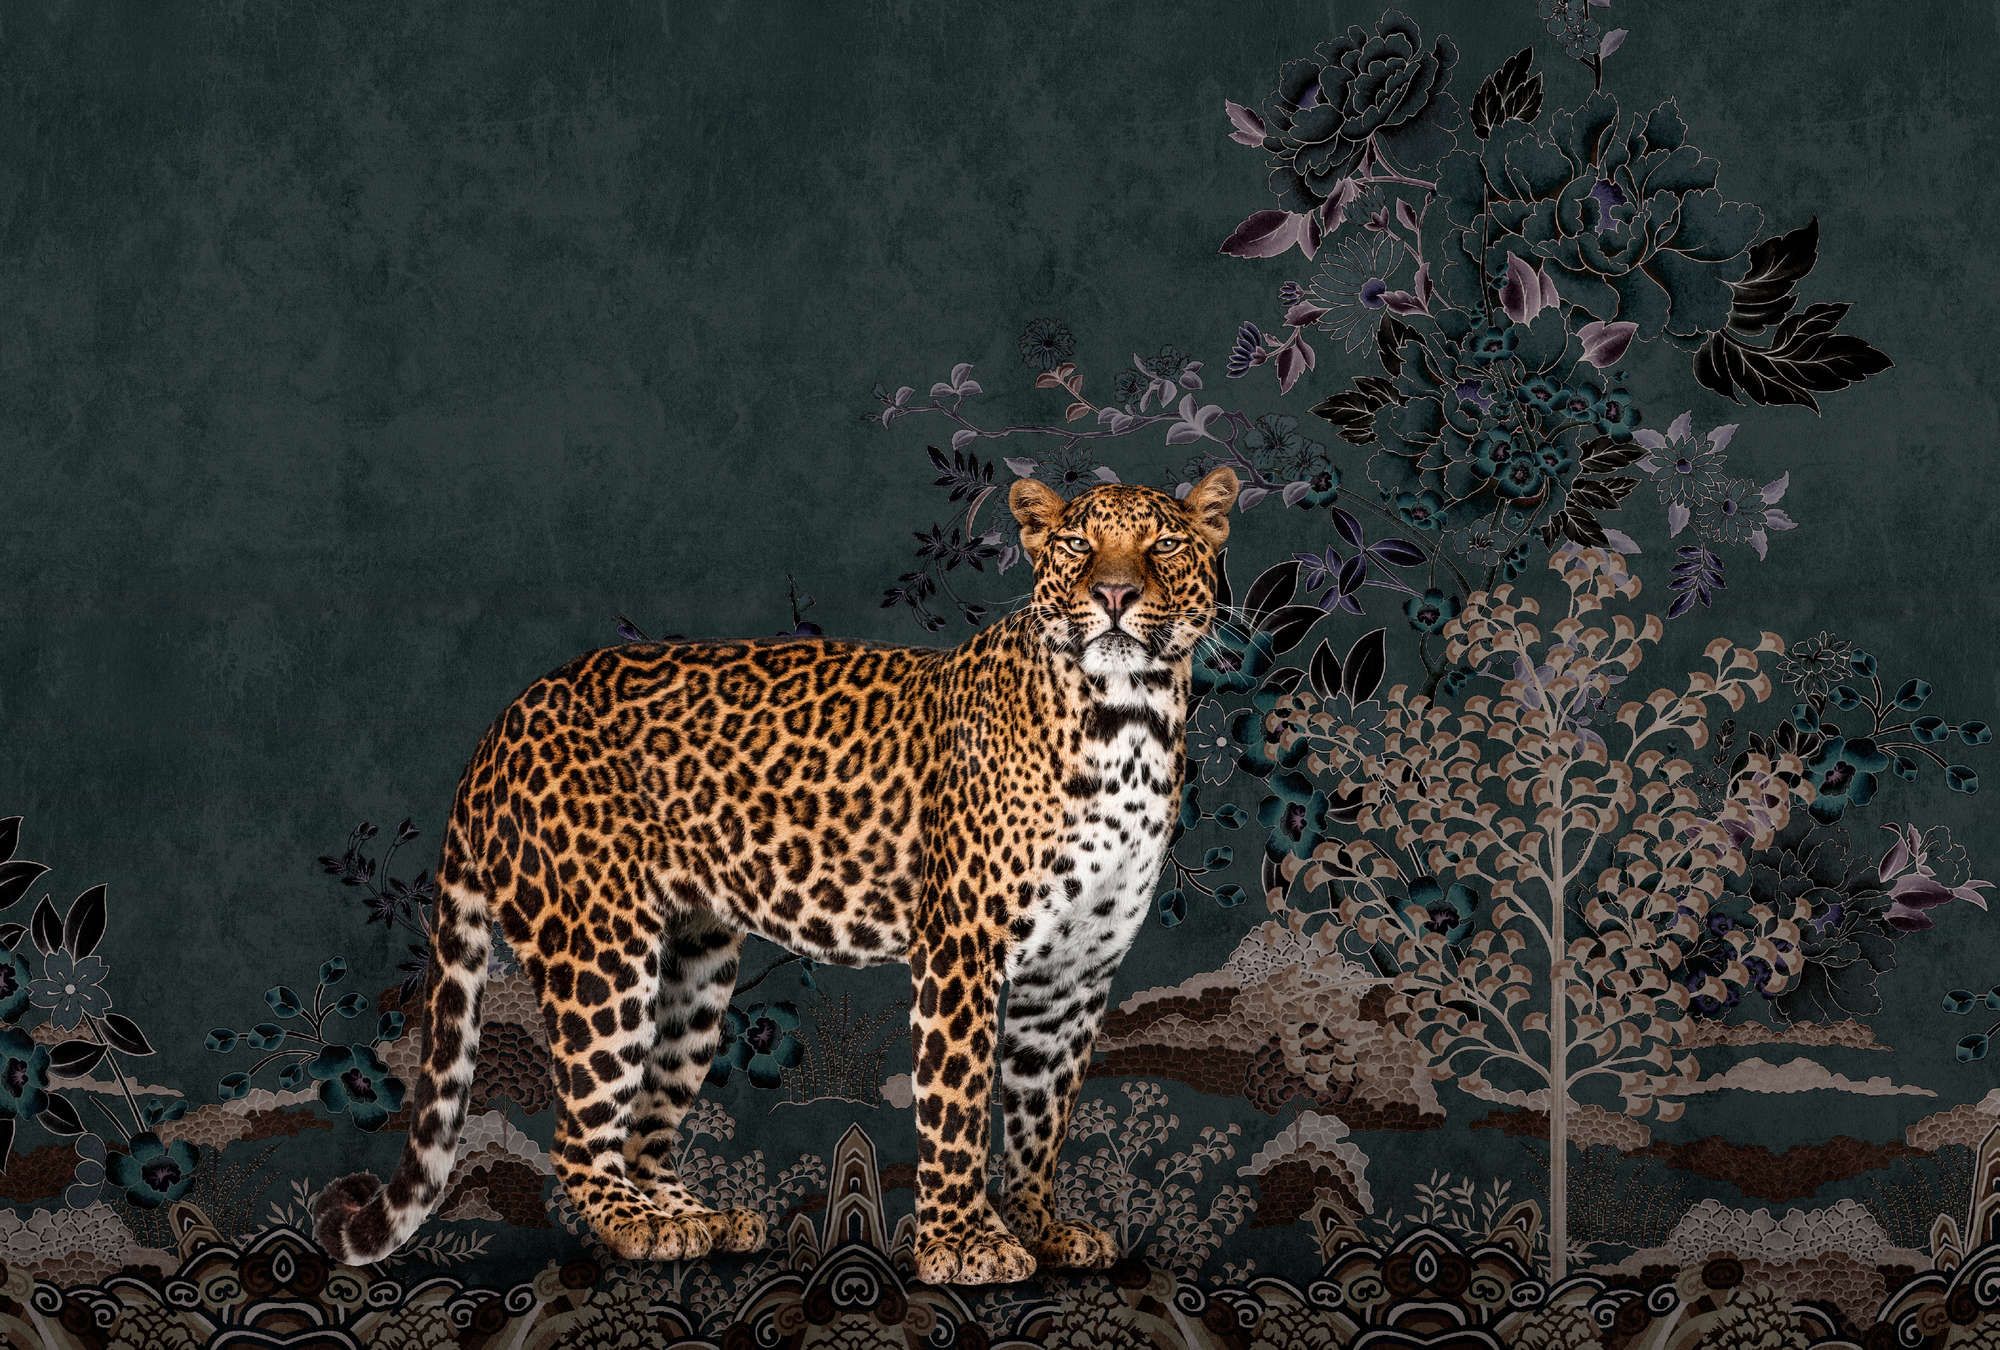             Photo wallpaper »rani« - Abstract jungle motif with leopard - Smooth, slightly shiny premium non-woven fabric
        